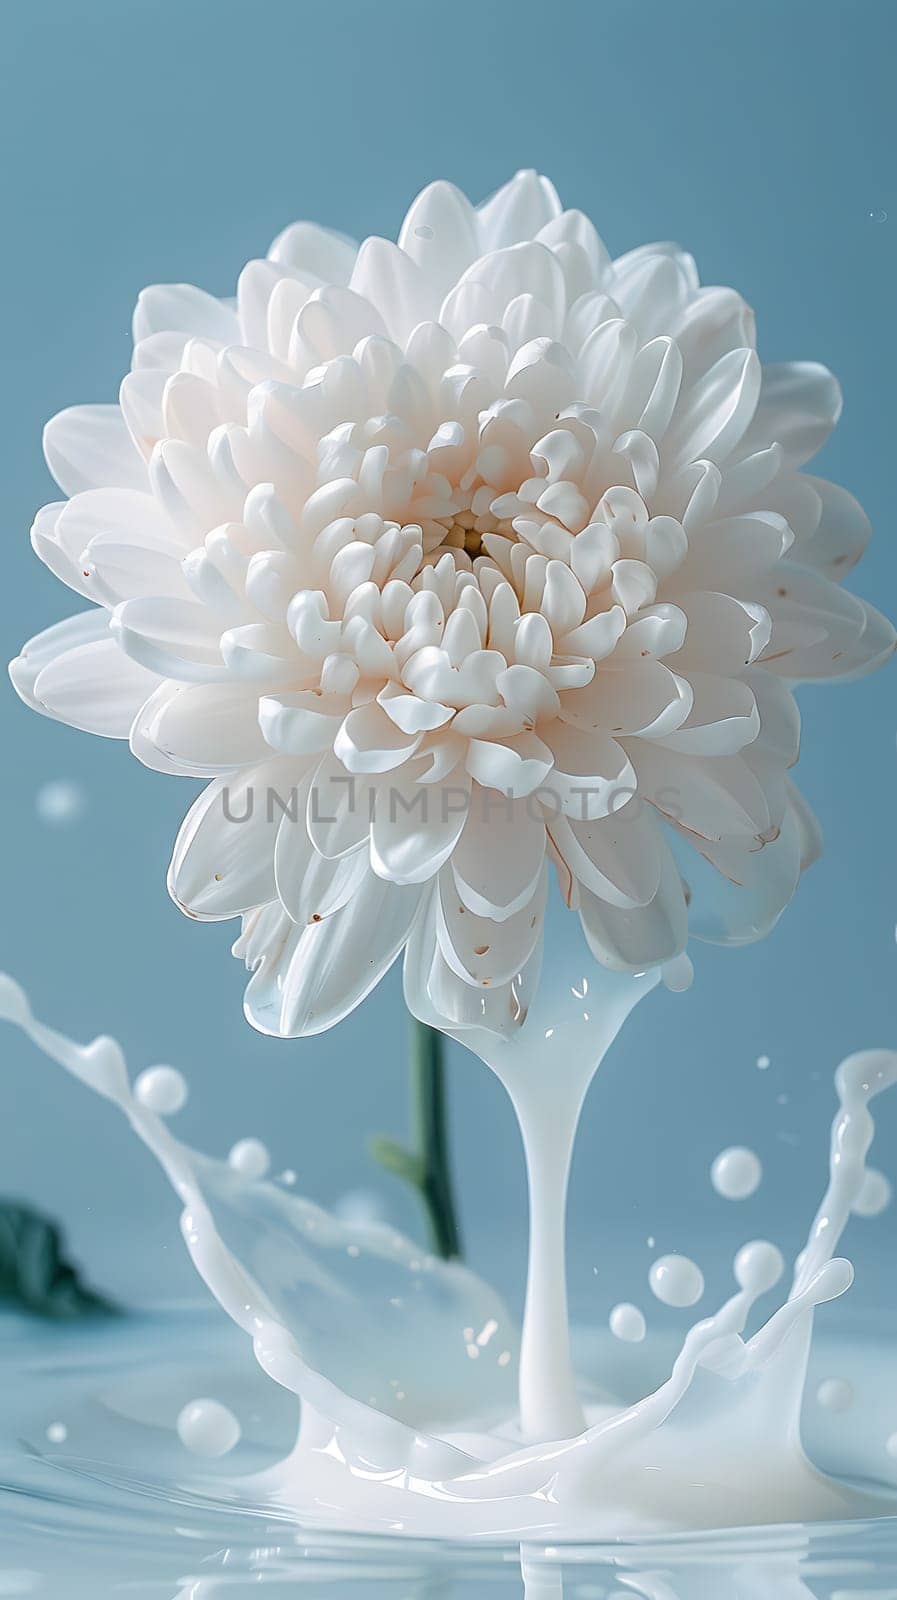 White flower splashing milk in water, creating an artistic display by Nadtochiy